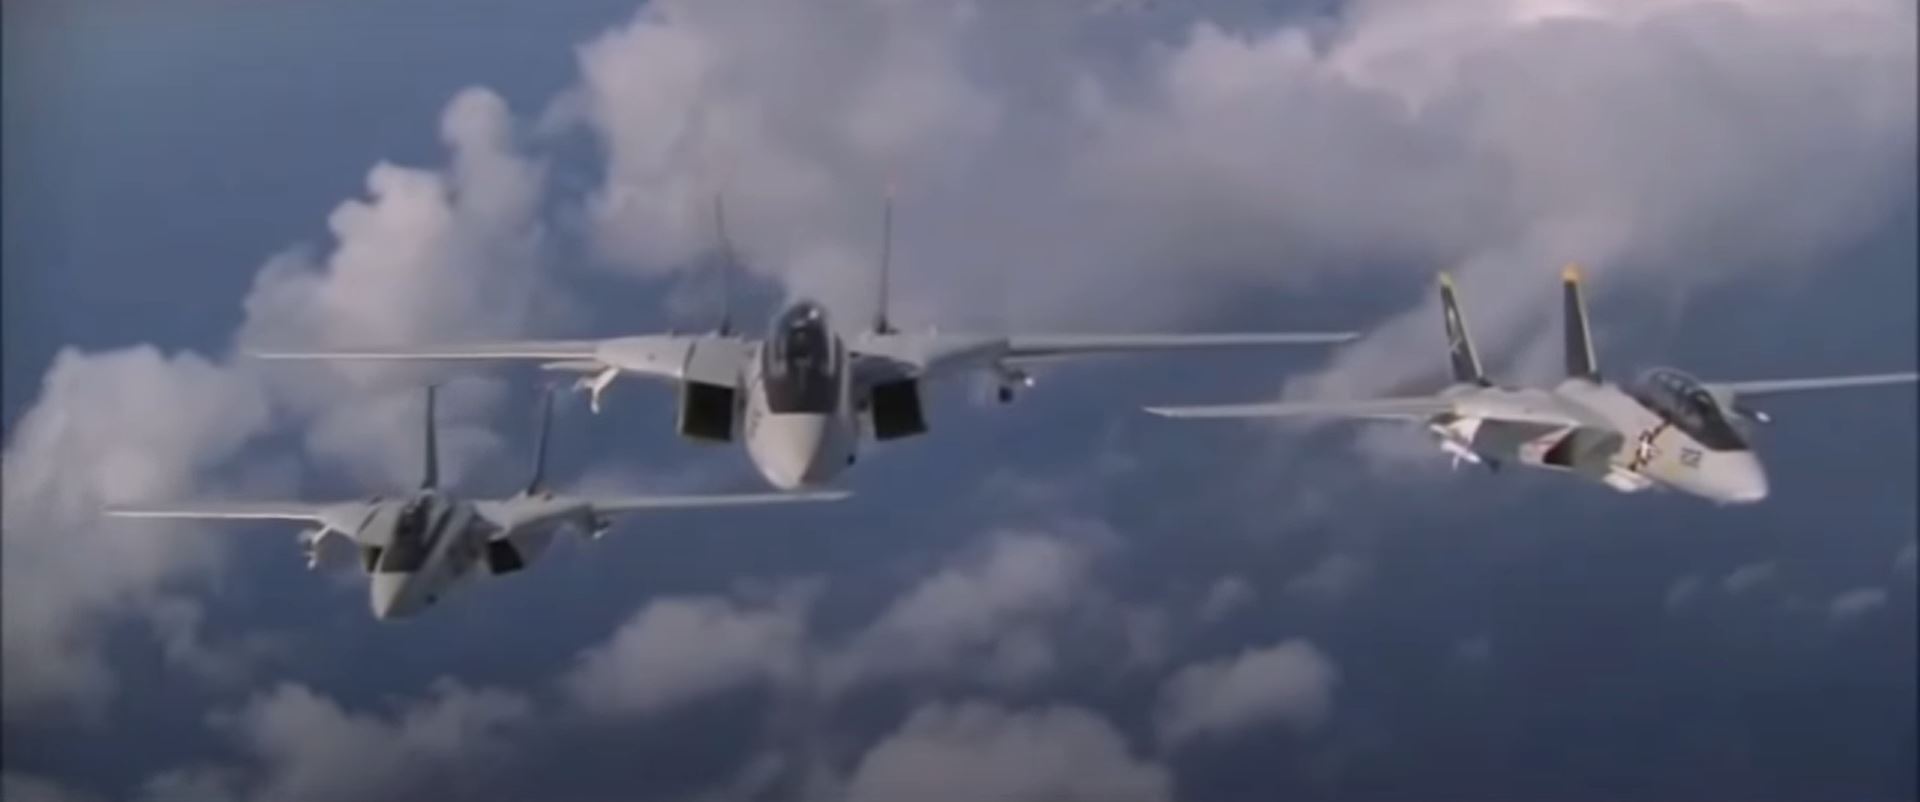 These F-14 Tomcat Videos Will Bring Back Awesome Memories Of Naval Aviation 5